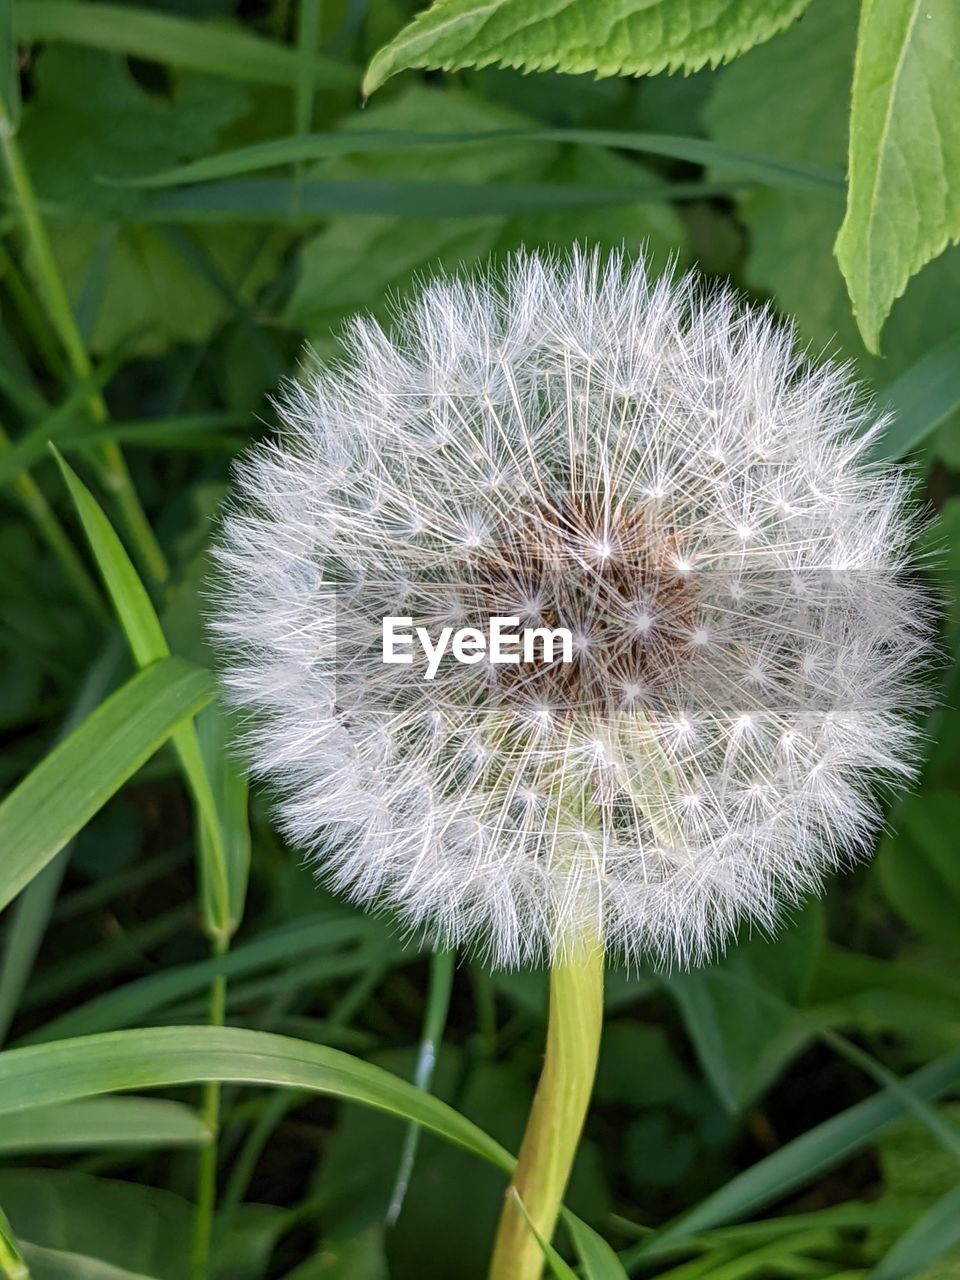 plant, flower, flowering plant, freshness, beauty in nature, close-up, fragility, nature, dandelion, growth, flower head, inflorescence, no people, focus on foreground, leaf, white, wildflower, plant part, green, outdoors, springtime, grass, plant stem, blossom, botany, environment, thistle, seed, day